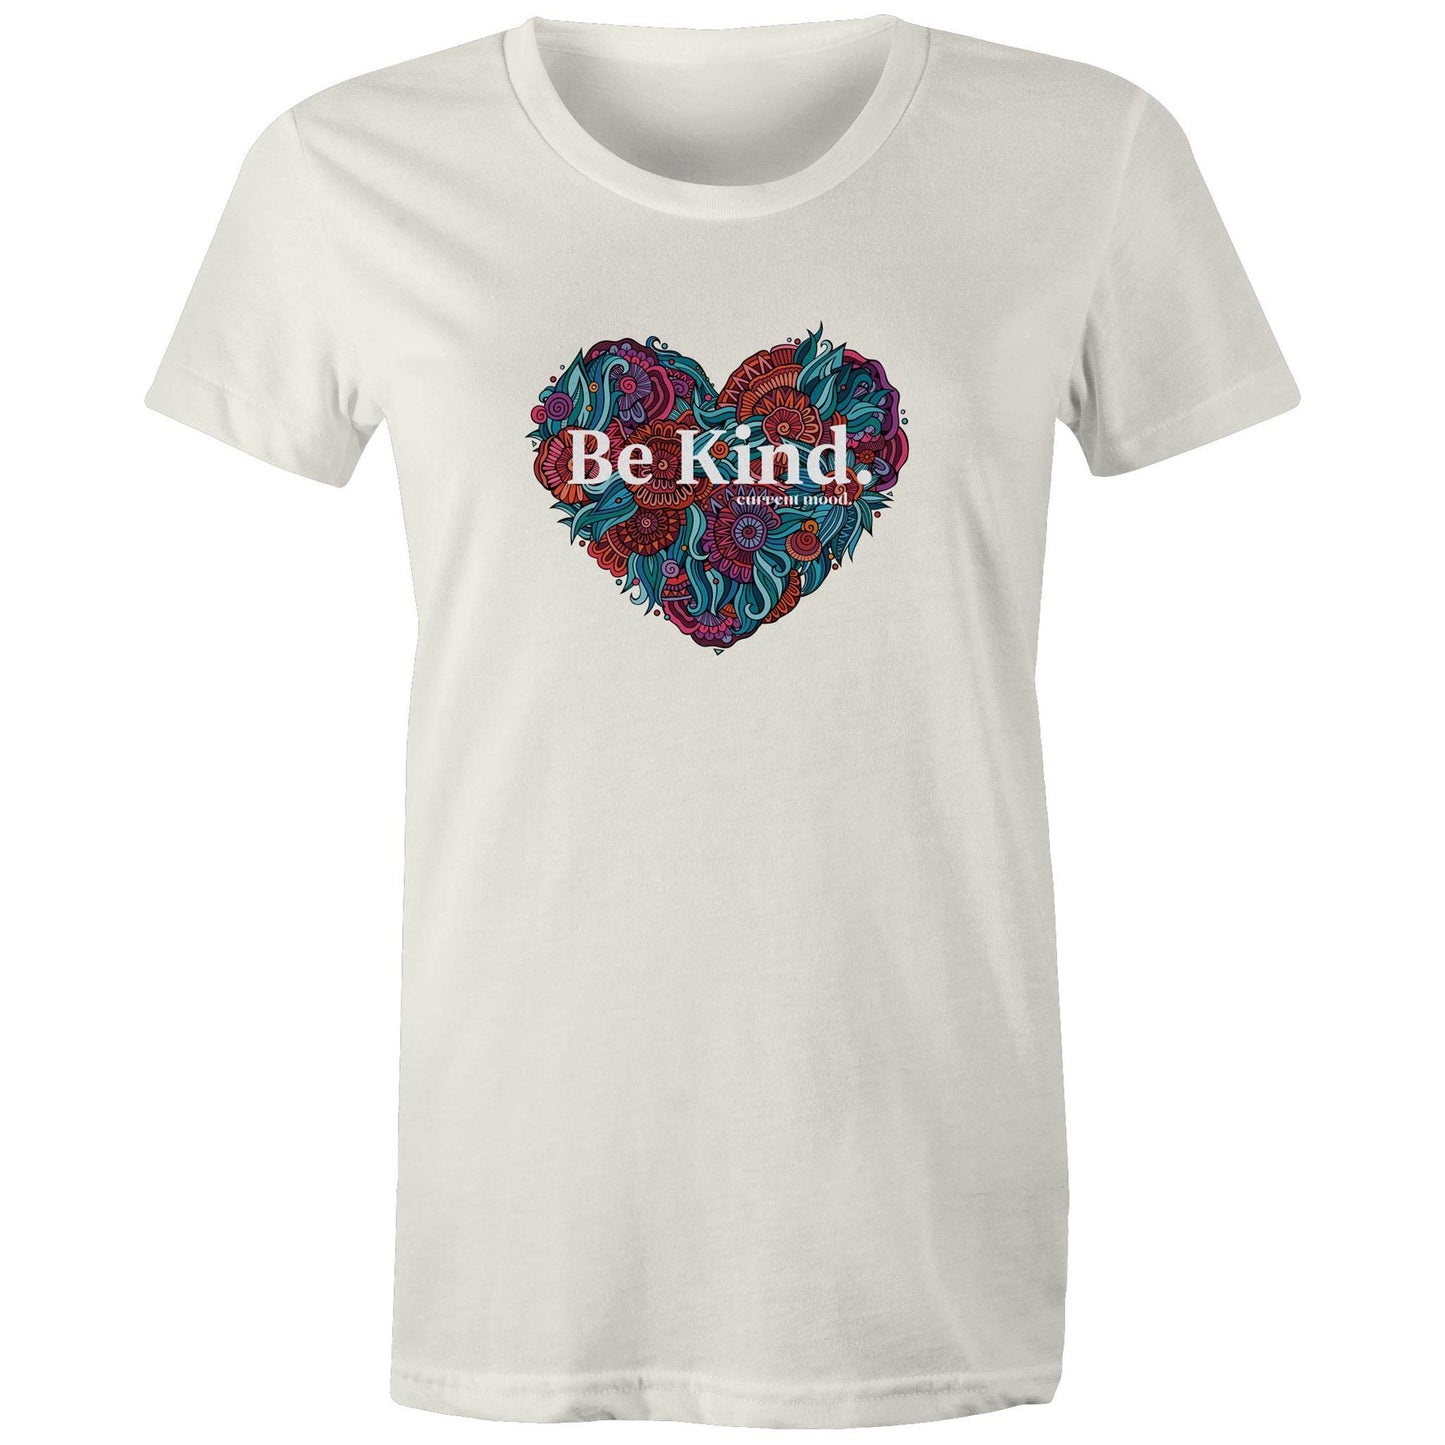 Current Mood 'Be Kind To My Heart' Women's Tee